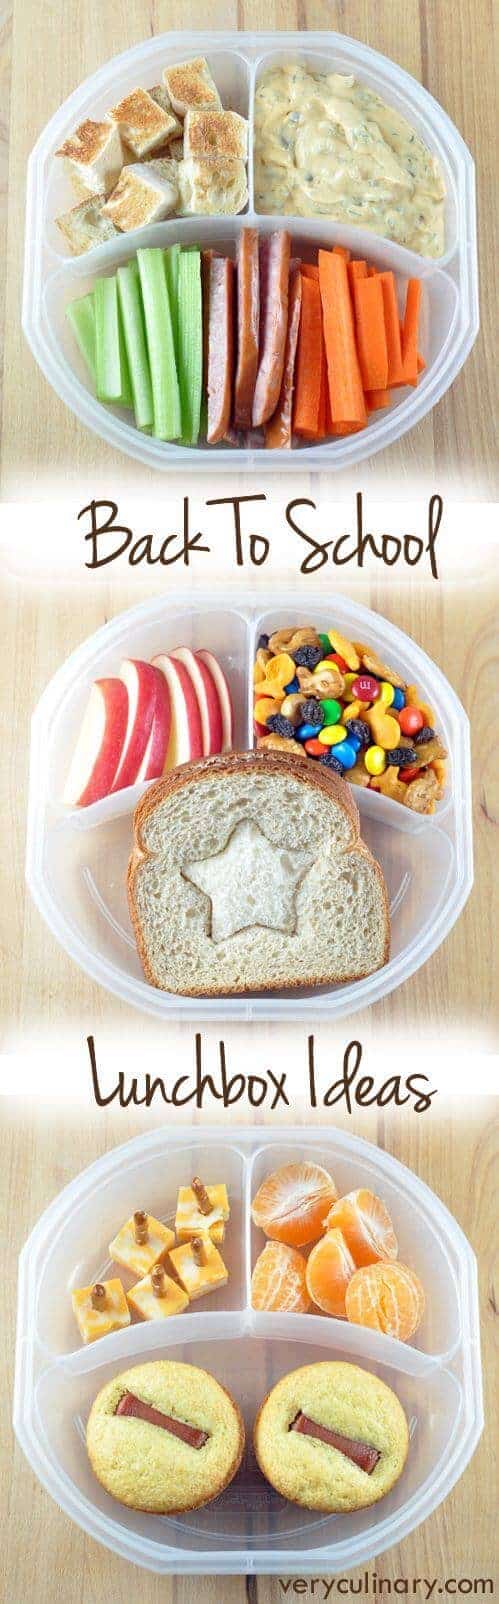 Back to School Lunchbox Ideas by Bellyfull